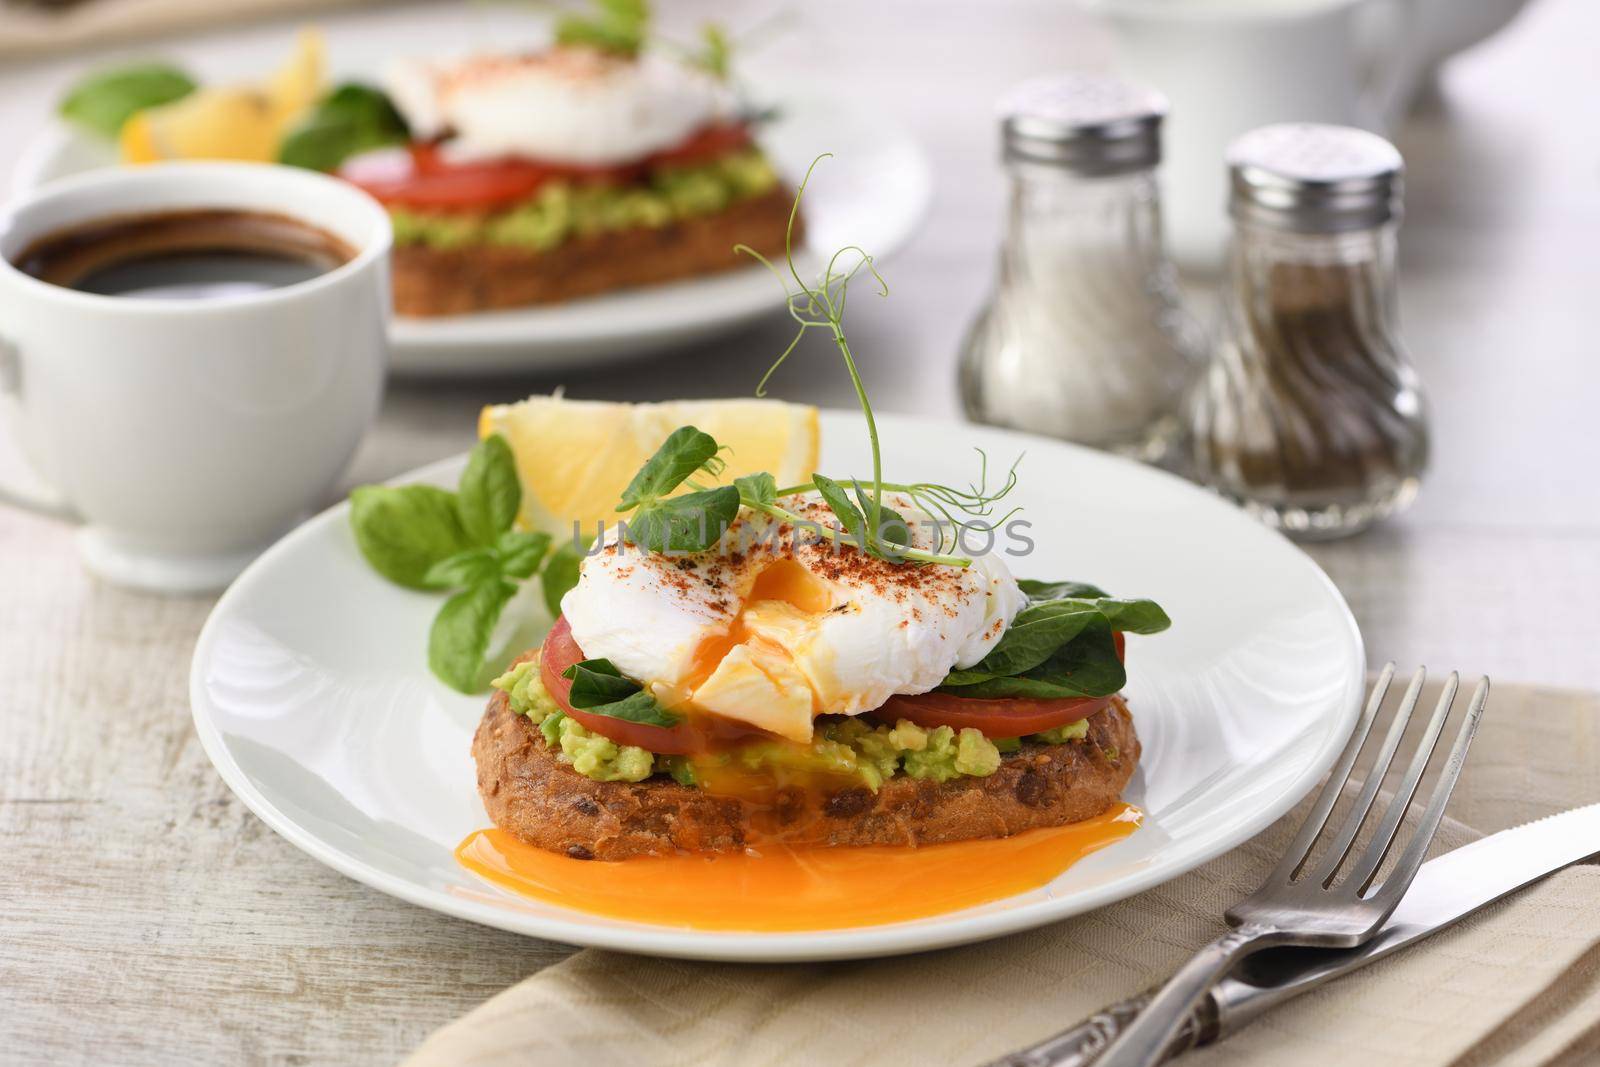 Eggs Benedict with guacamole on cereal bread by Apolonia